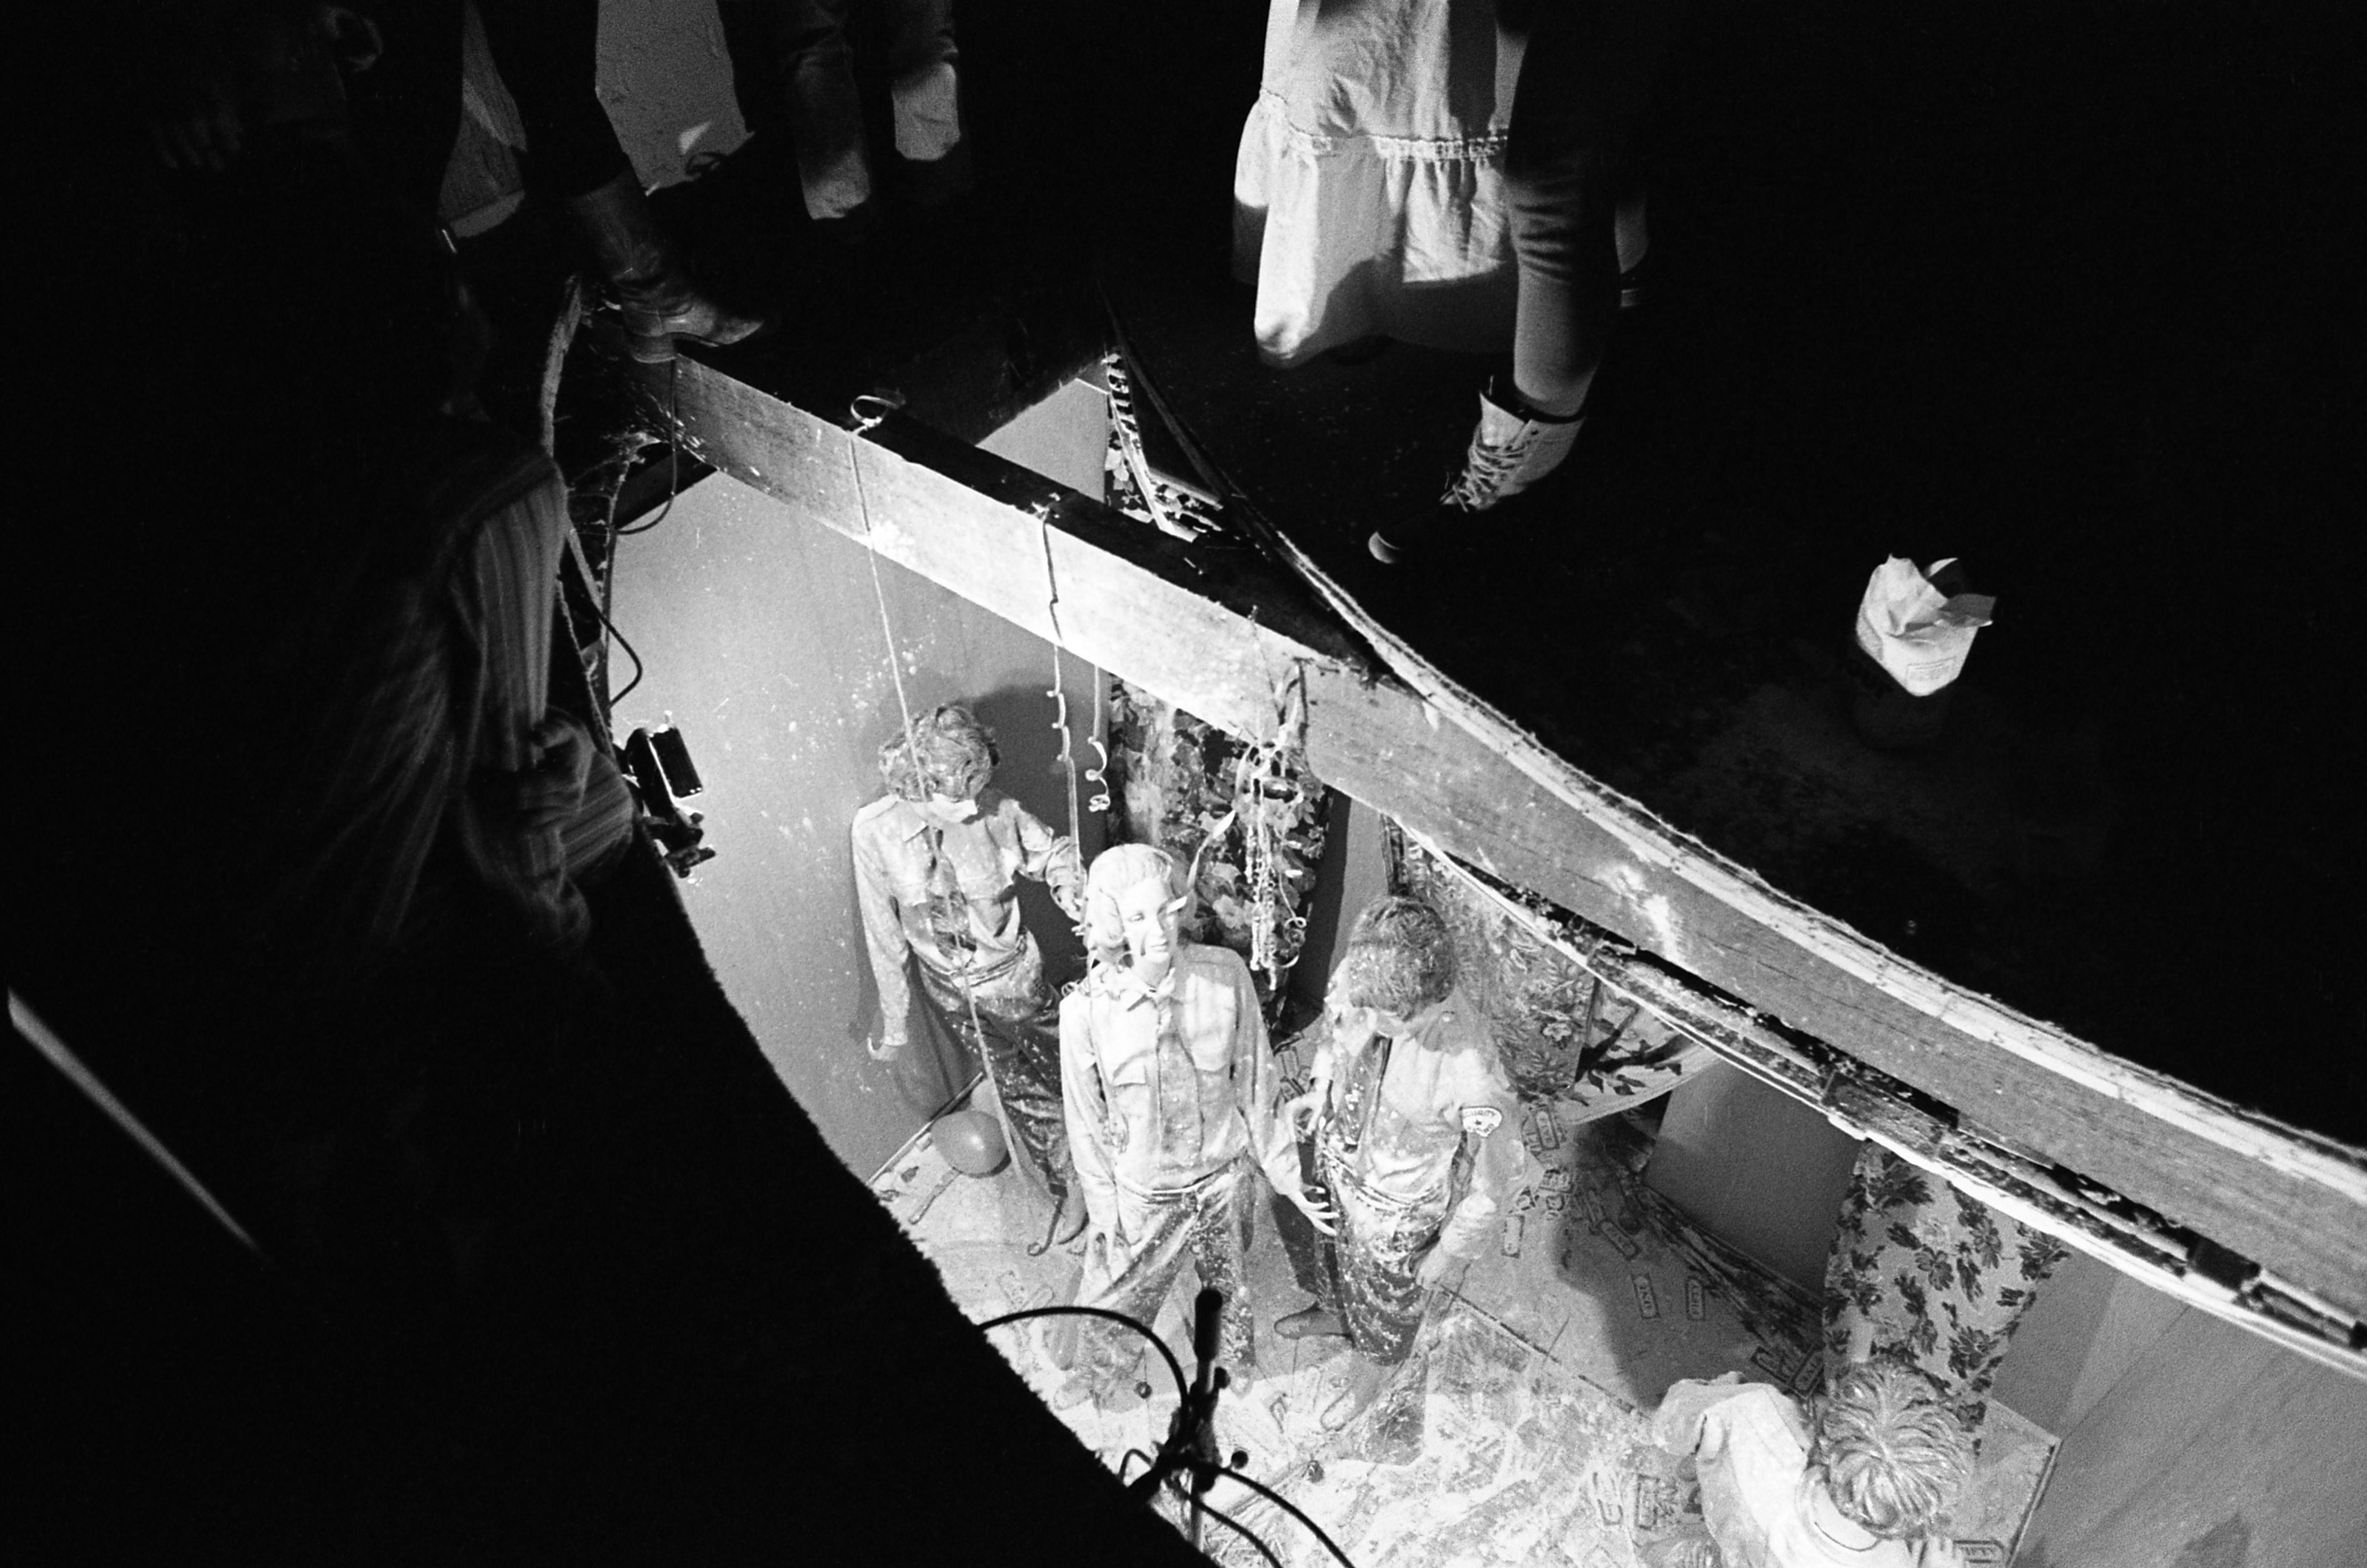 A group of people look up through a cut in a floor. The feet of several others viewing the group can be seen around the cut.